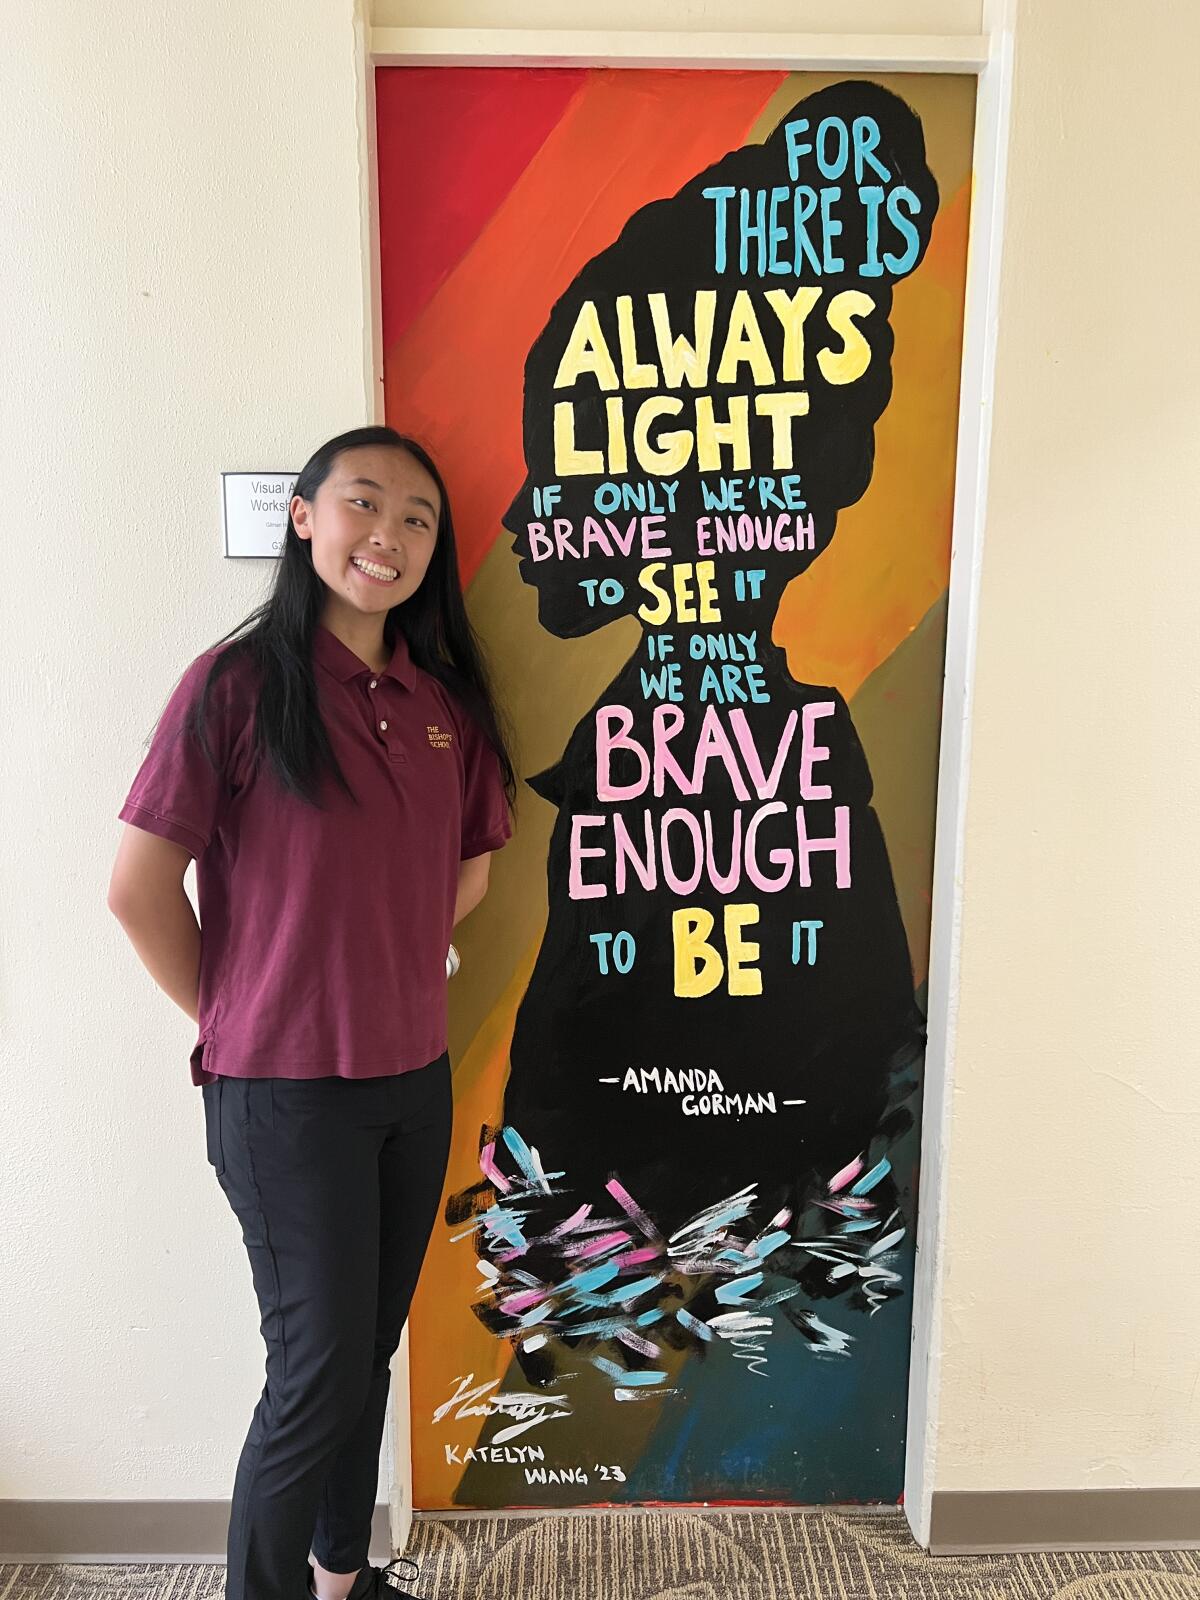 Art “breaches a lot of barriers," says Katelyn Wang, who painted this door at The Bishop's School.